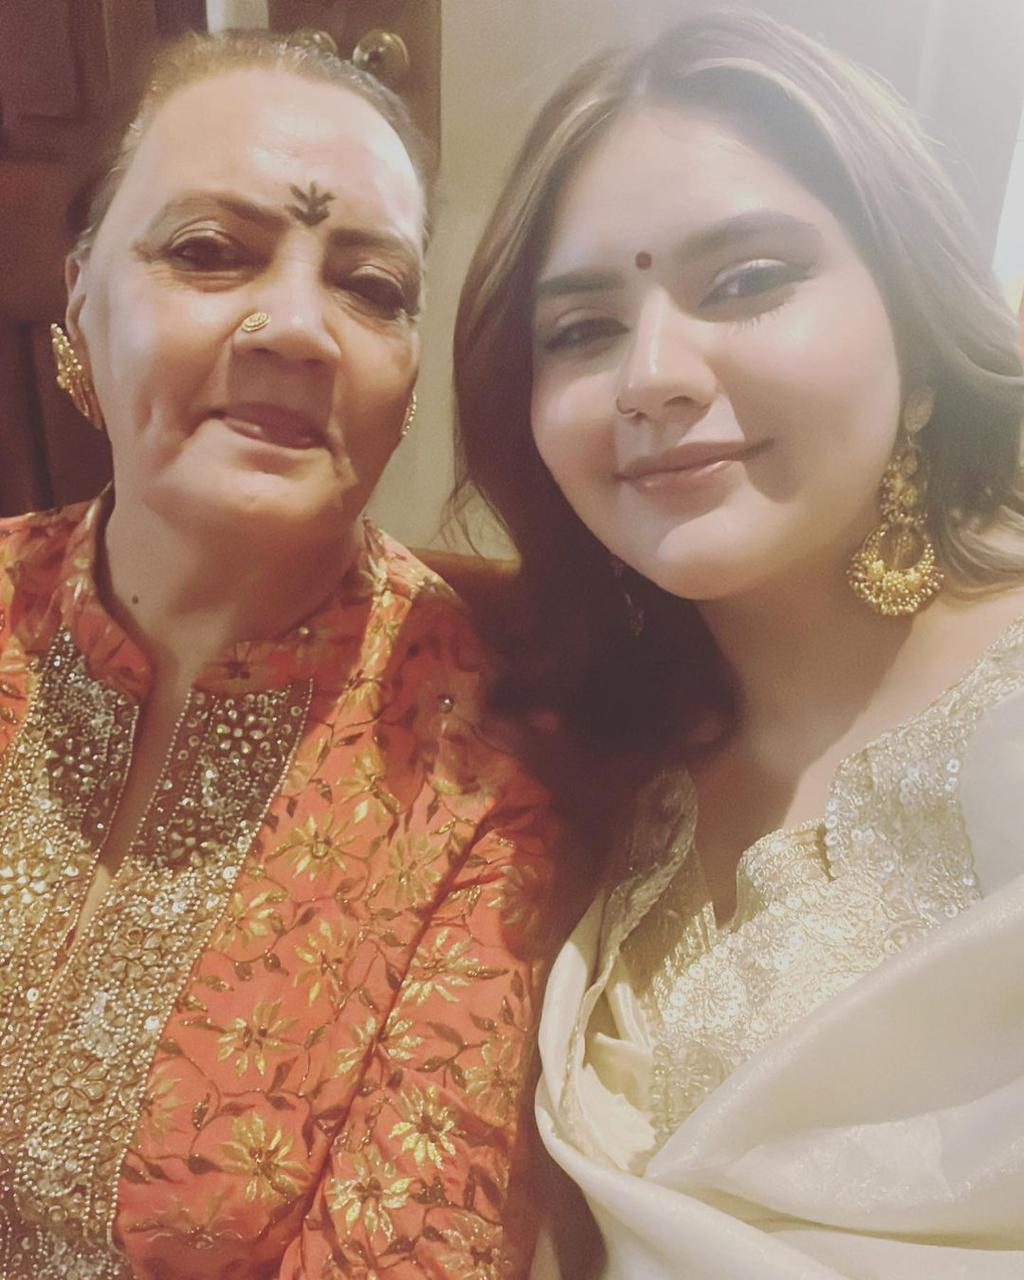 Jhalak Dikhhla Jaa 11 contestant, Anjali Anand’s mother to make special appearance on the show; talks about Anjali’s dream being fulfilled through Jhalak